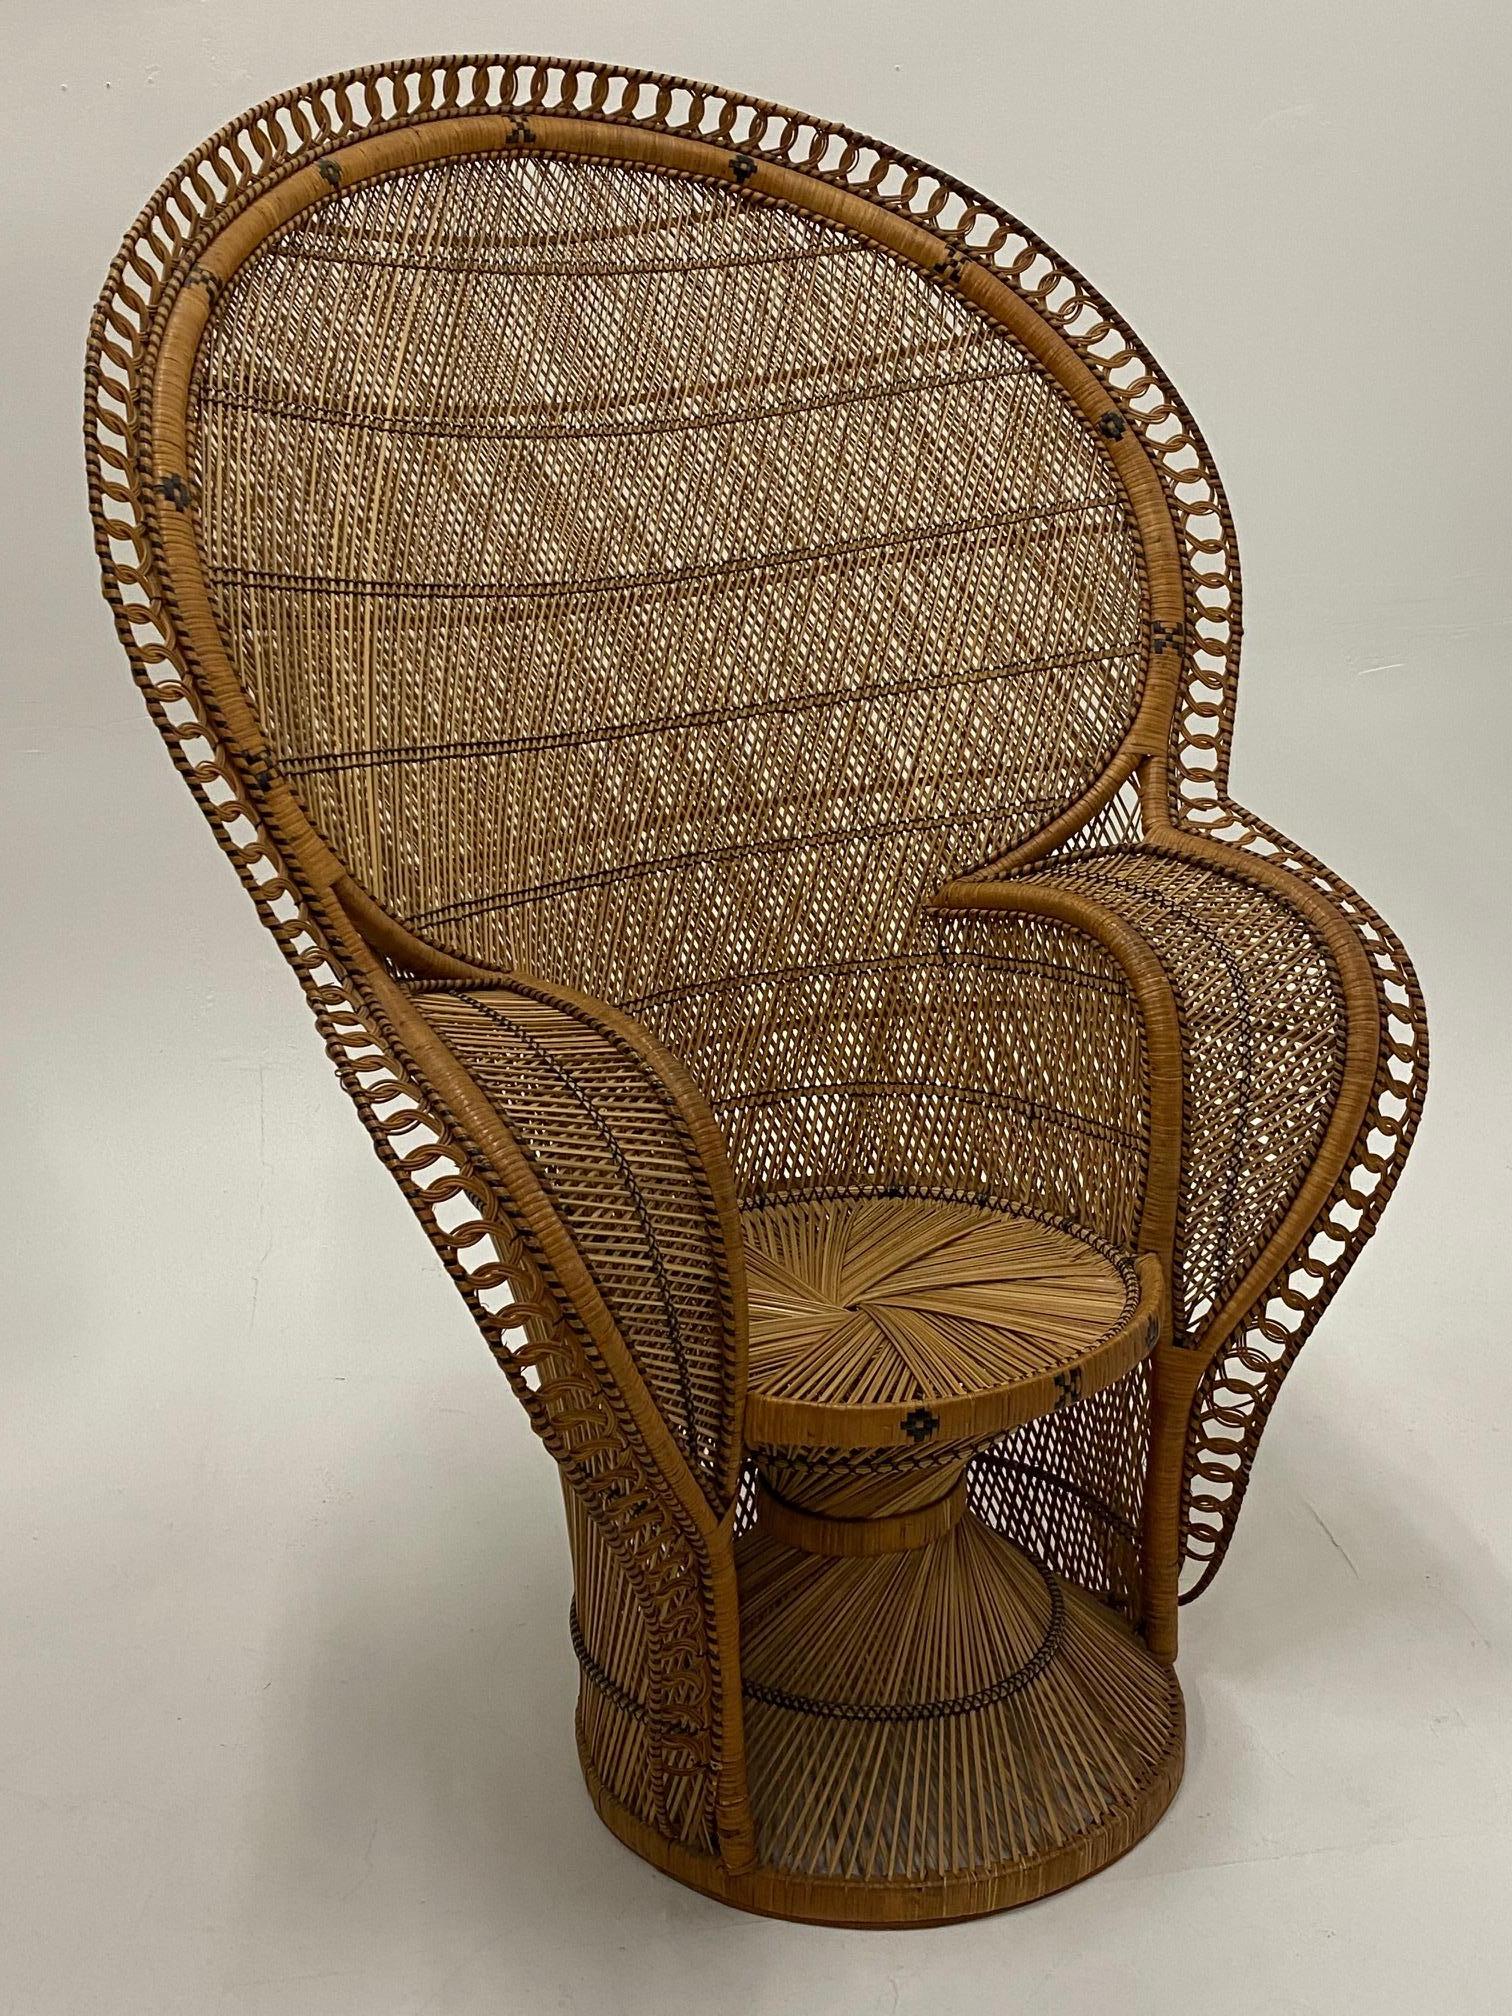 The finest one we've seen in a superb, large, and extremely detailed cobra peacock chair made of woven rattan.